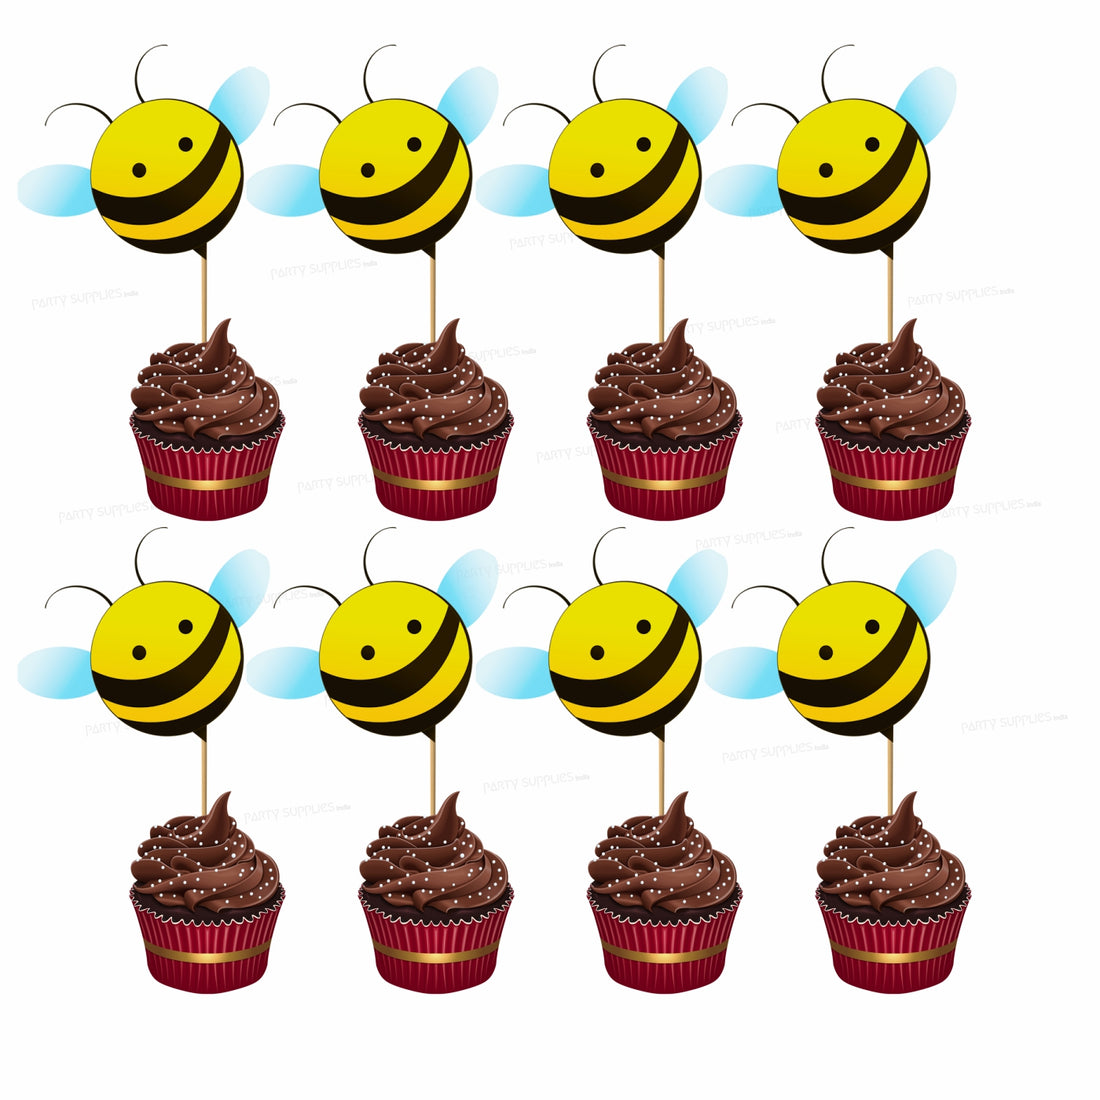 PSI Bumble Bee Theme Classic Cup Cake Topper